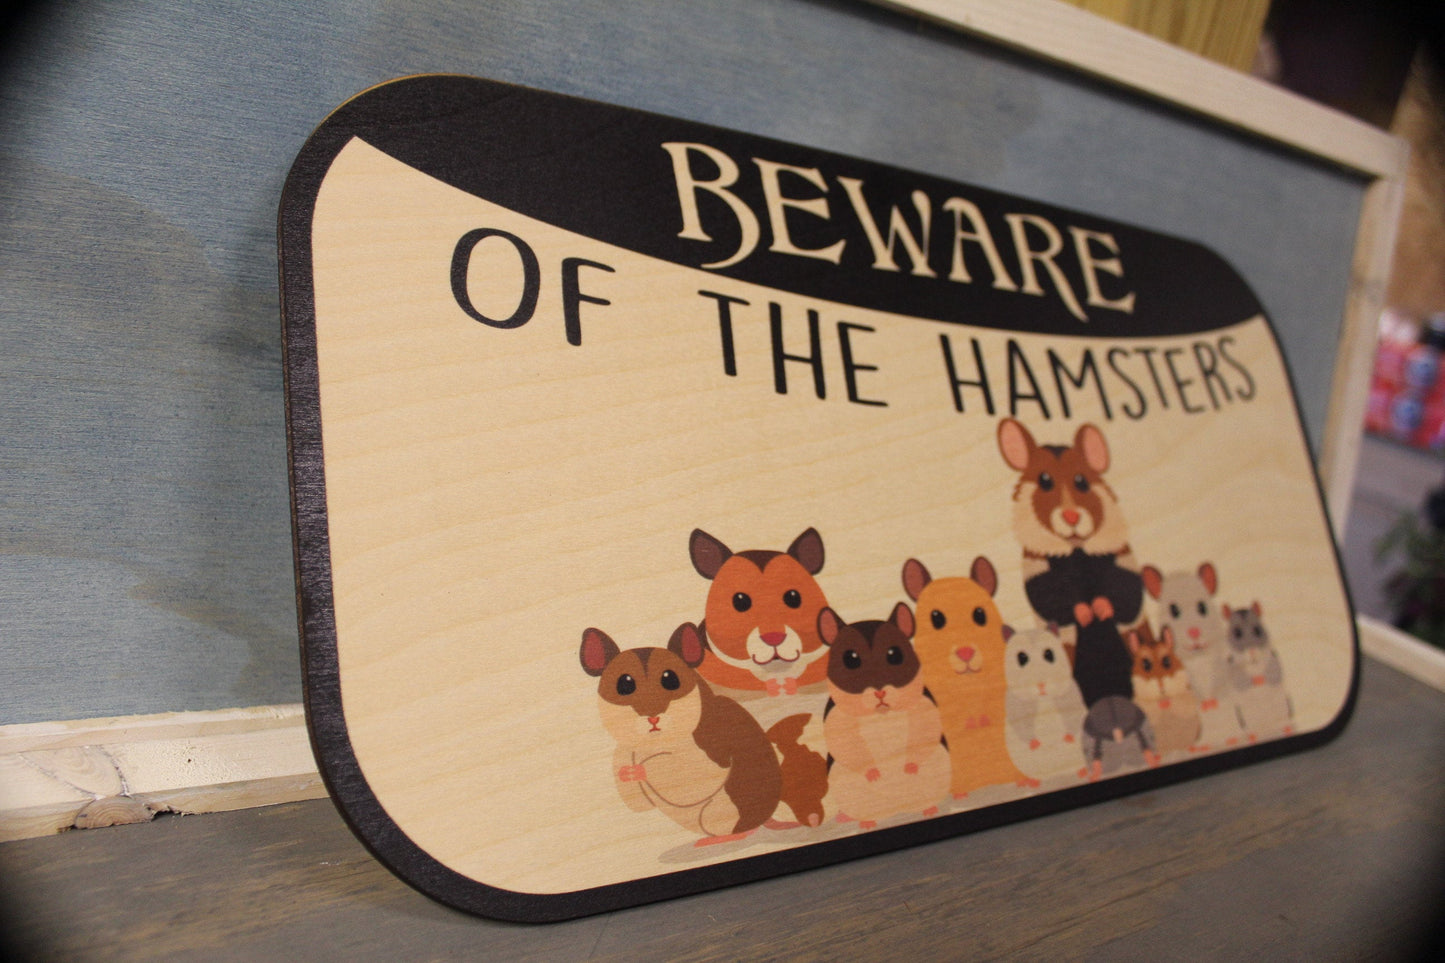 Beware Of The Hamsters Warning Furbaby Pet Animal Lover Small Pets Kids Room Wooden Sign Wall Decor Art Plaque Wood Print